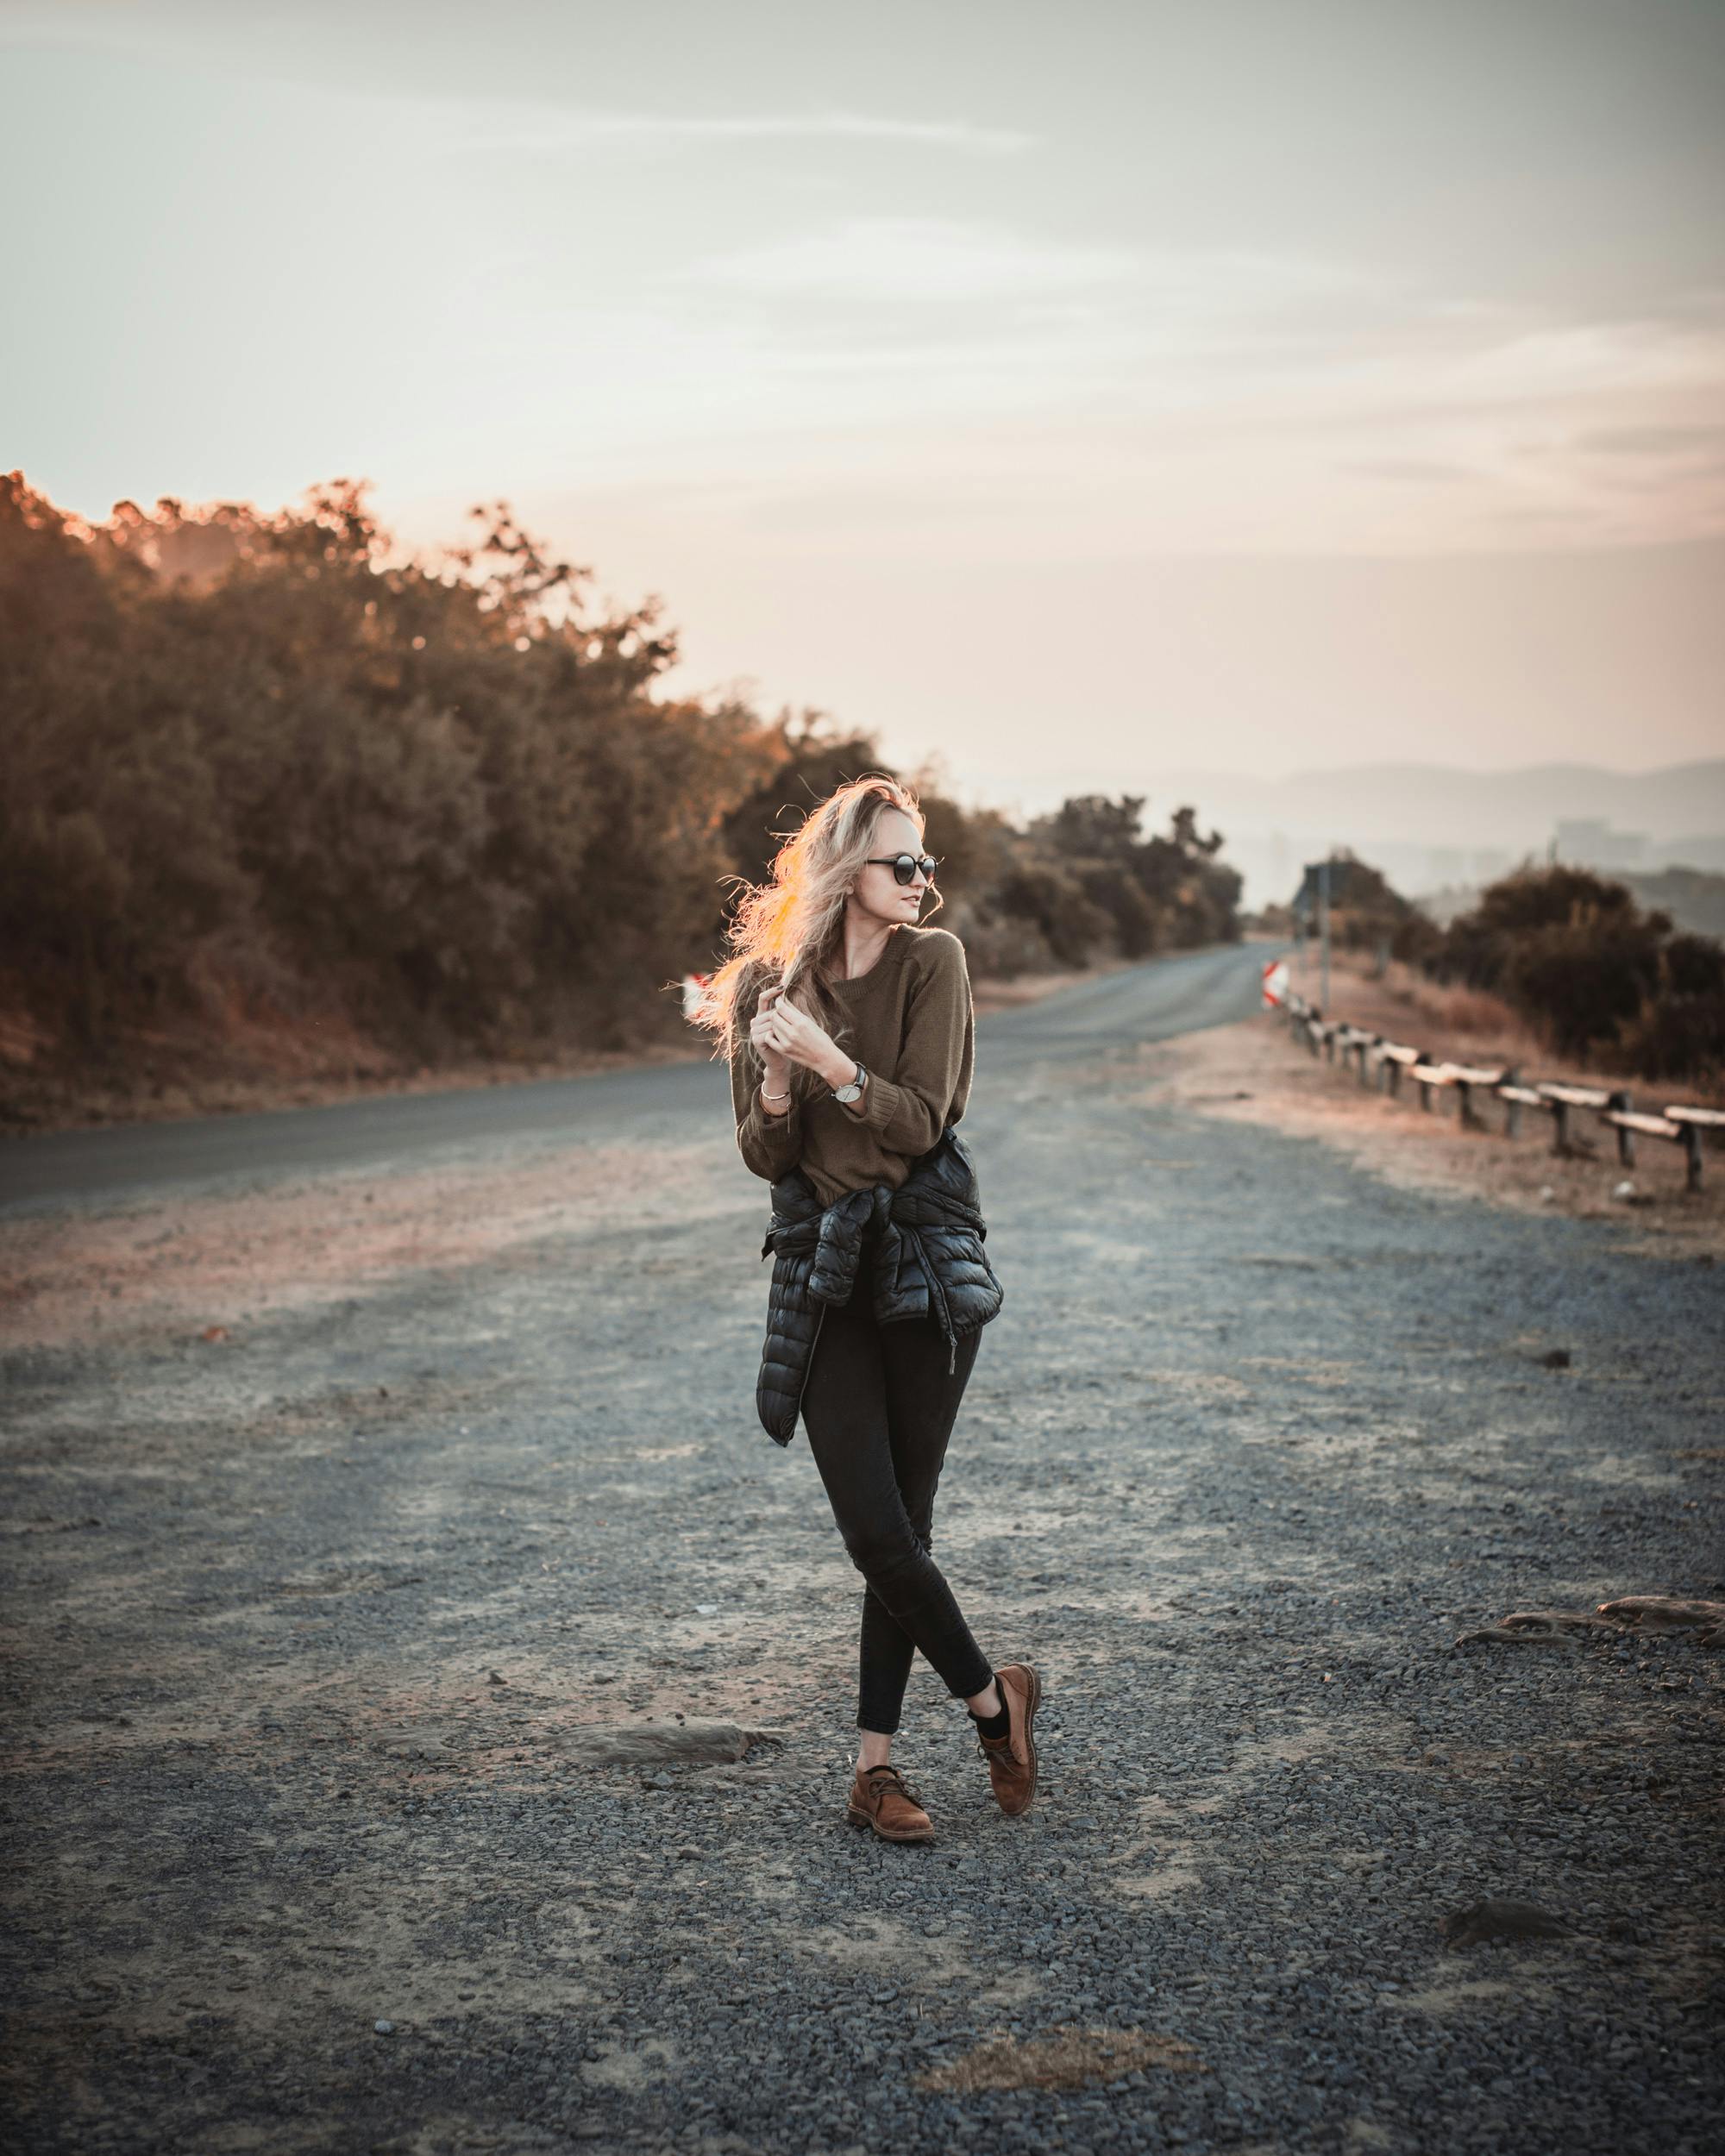 Photo of Woman Standing on Dirt Road